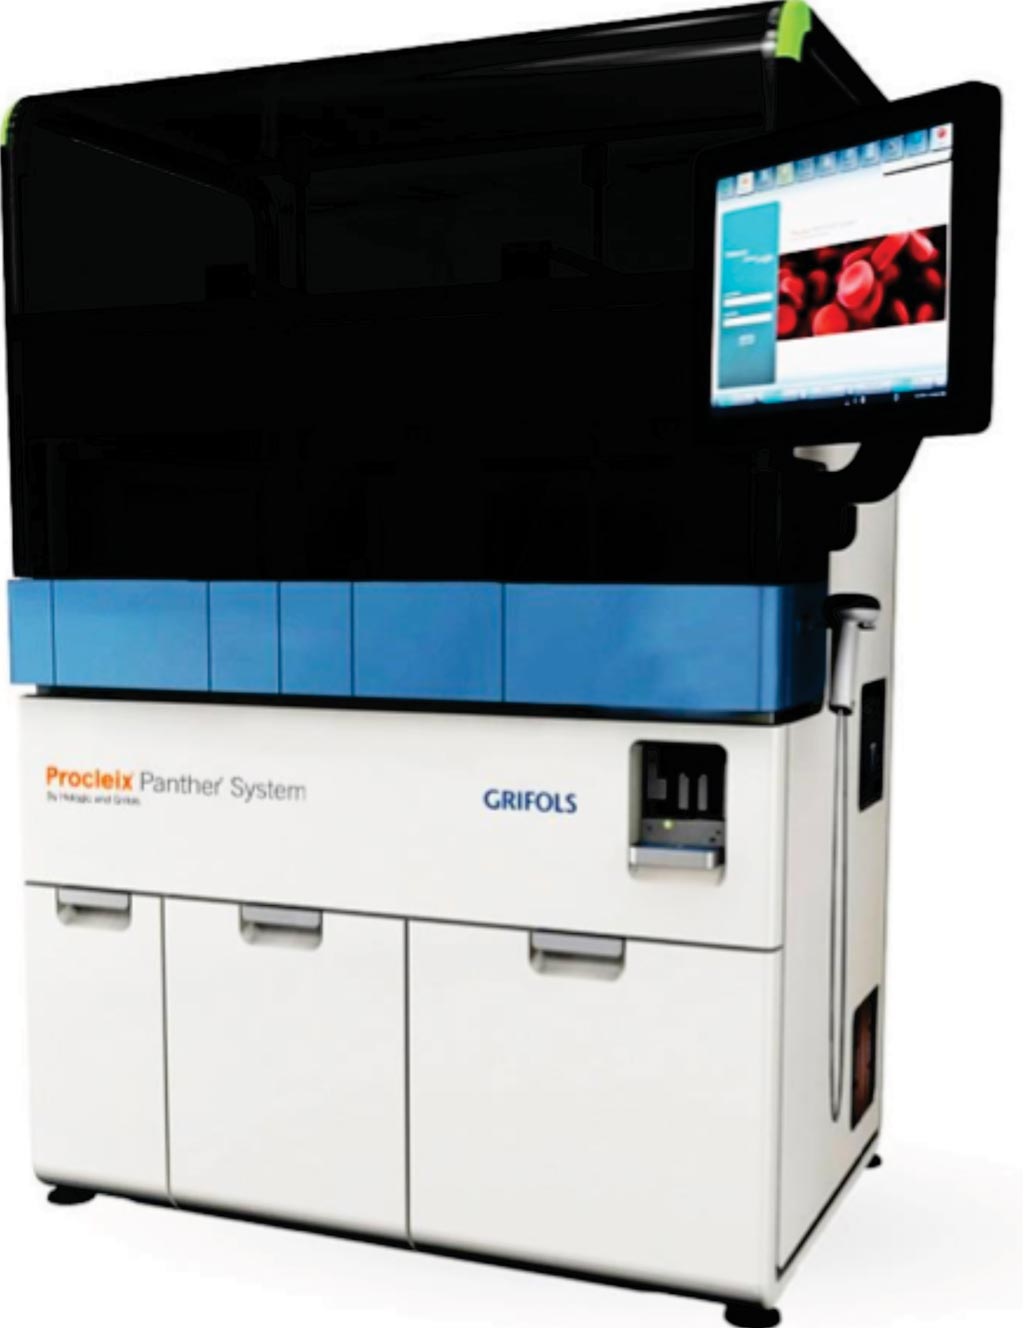 Image: The Procleix Panther system, a fully integrated and automated nucleic acid technology system for blood and plasma screening (Photo courtesy of Grifols Diagnostics).